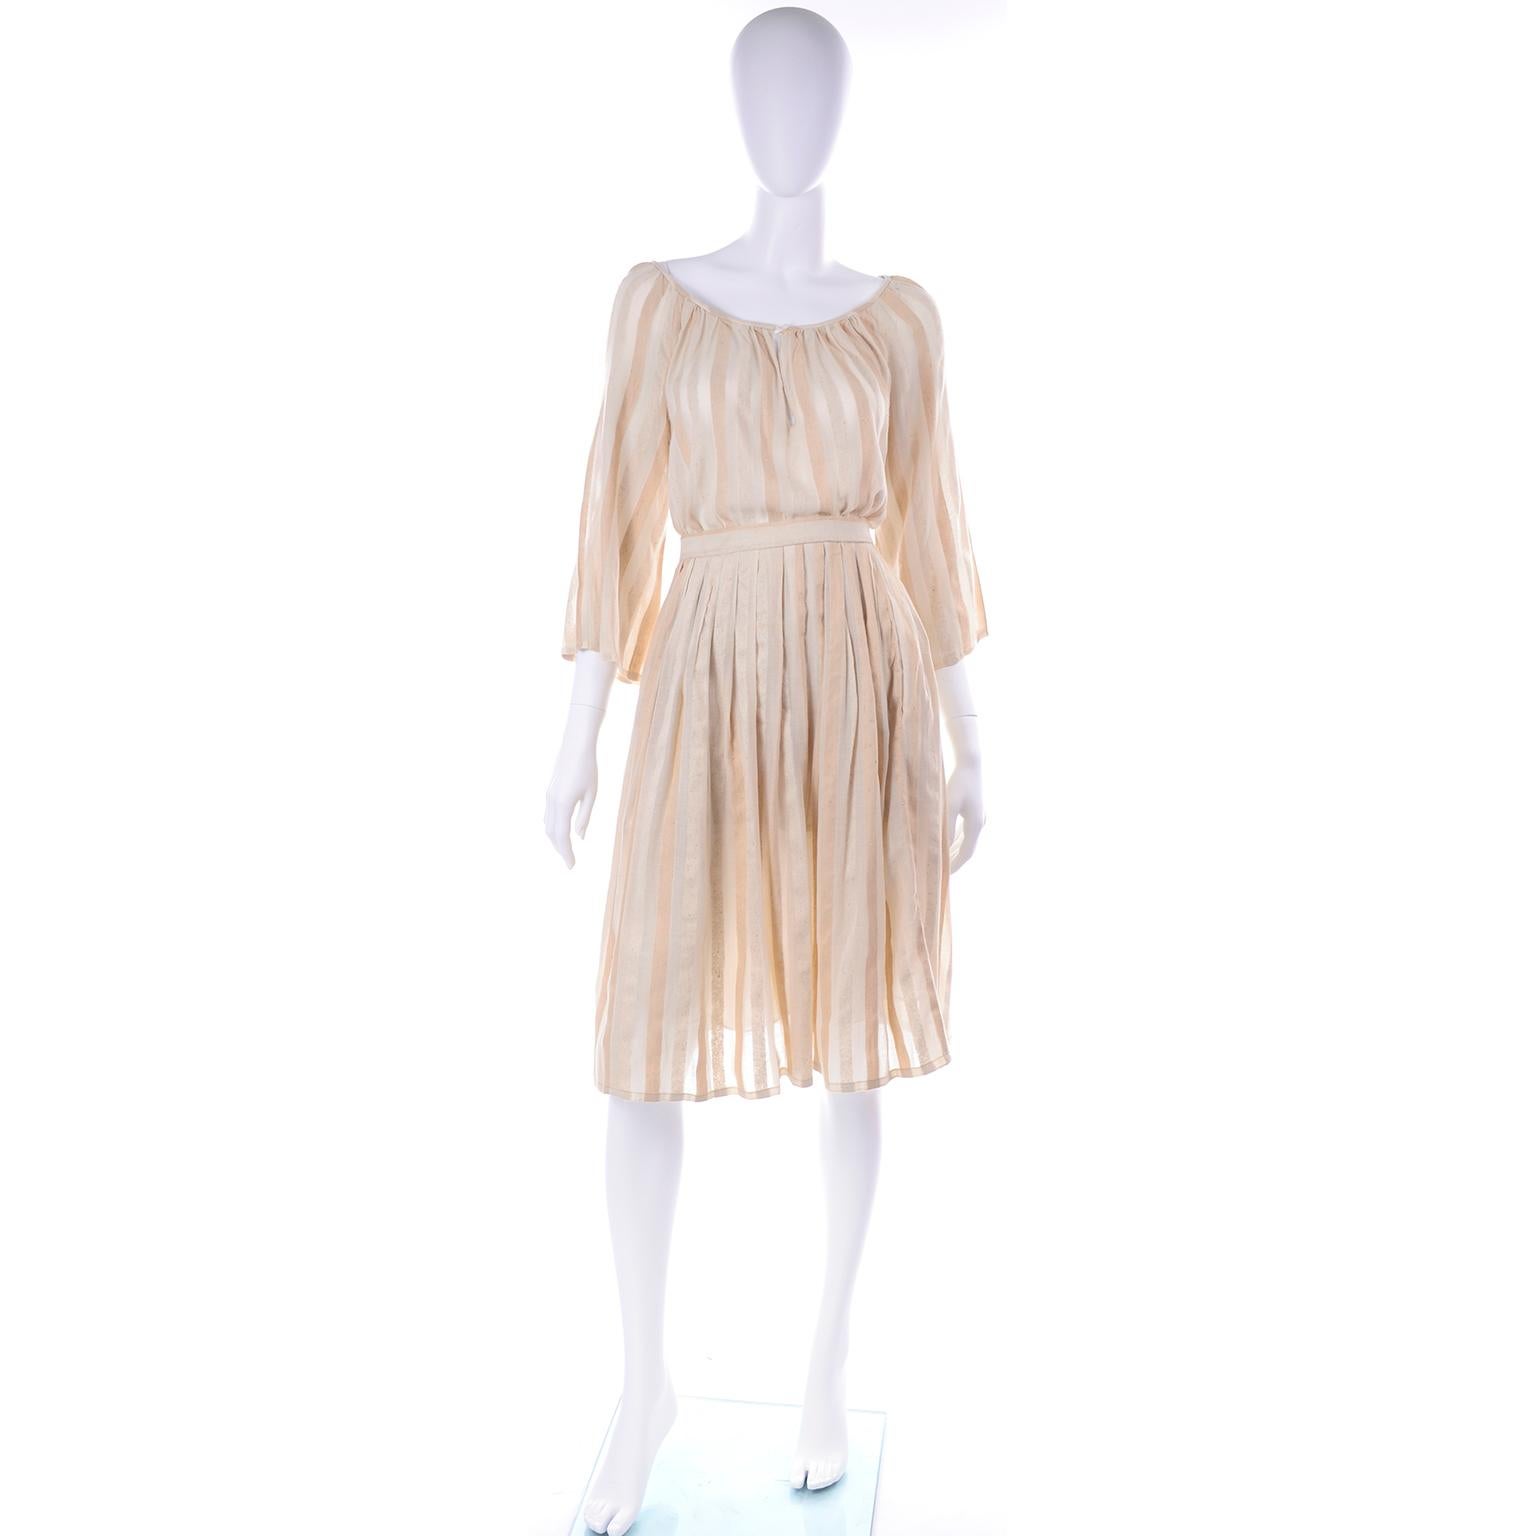 This is a really wonderful vintage 1970's Anne Klein 2-Piece Dress in a tonal striped natural linen and raw silk. This dress was made in USA (Union label) and is marked a size 8. The dress closes with a Waistband hook-and-eye and a metal zipper down